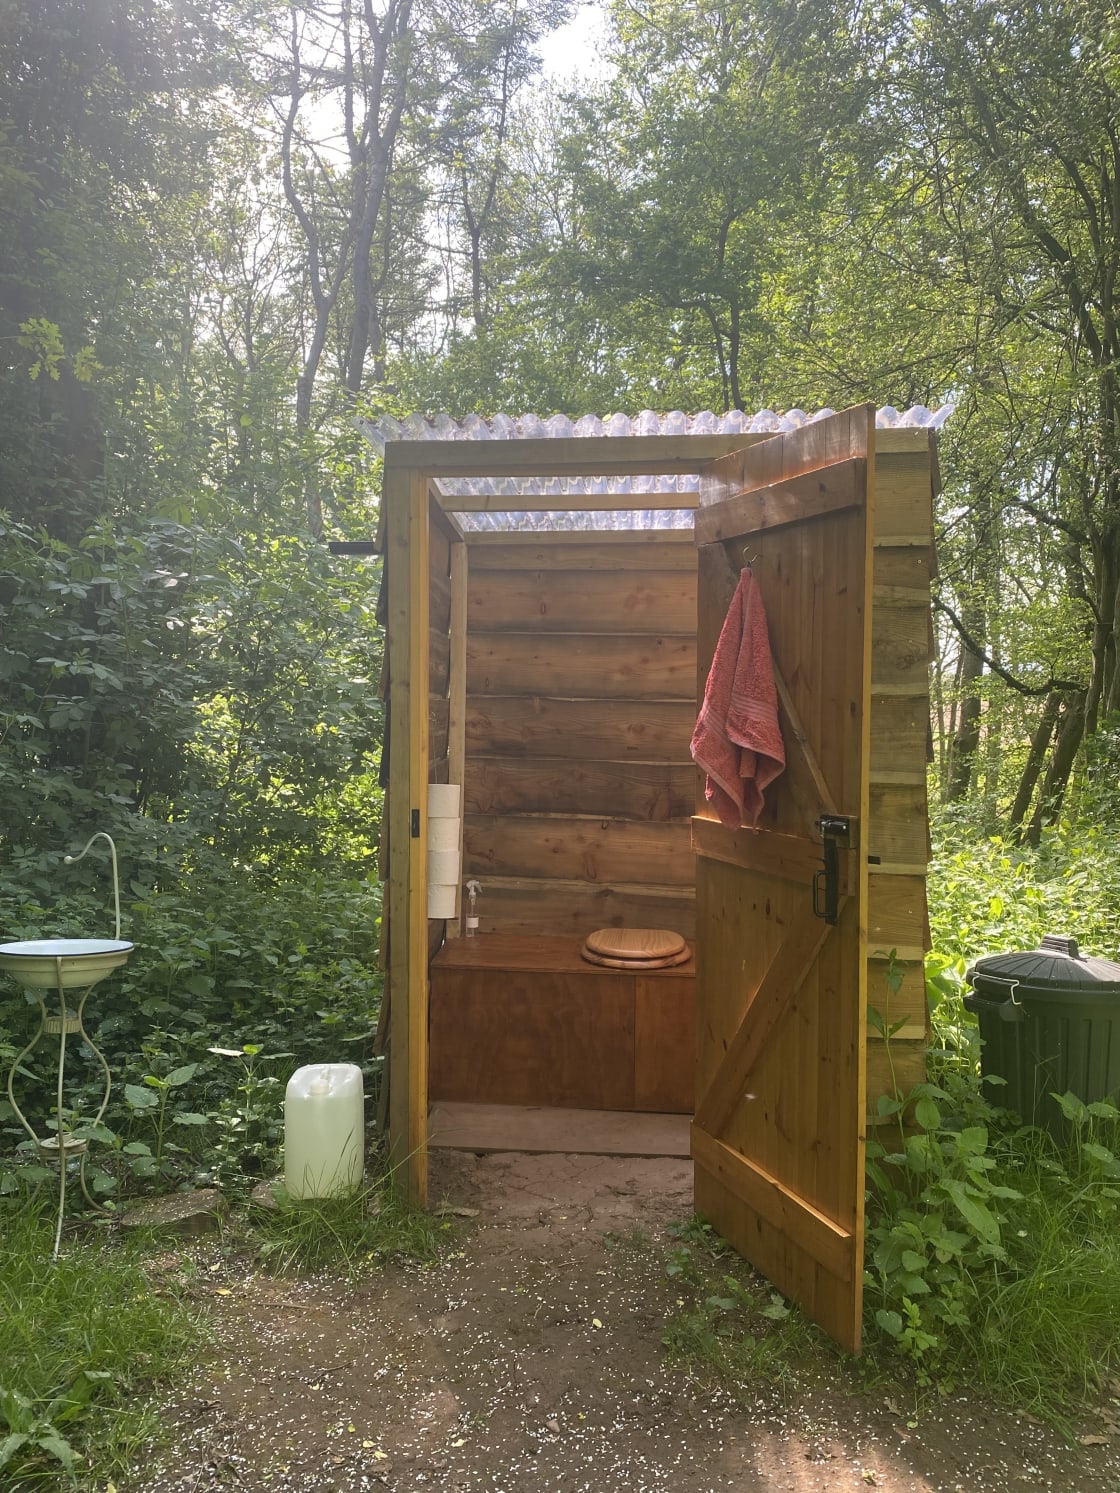 Your own compost toilet 10 meters away from your tent